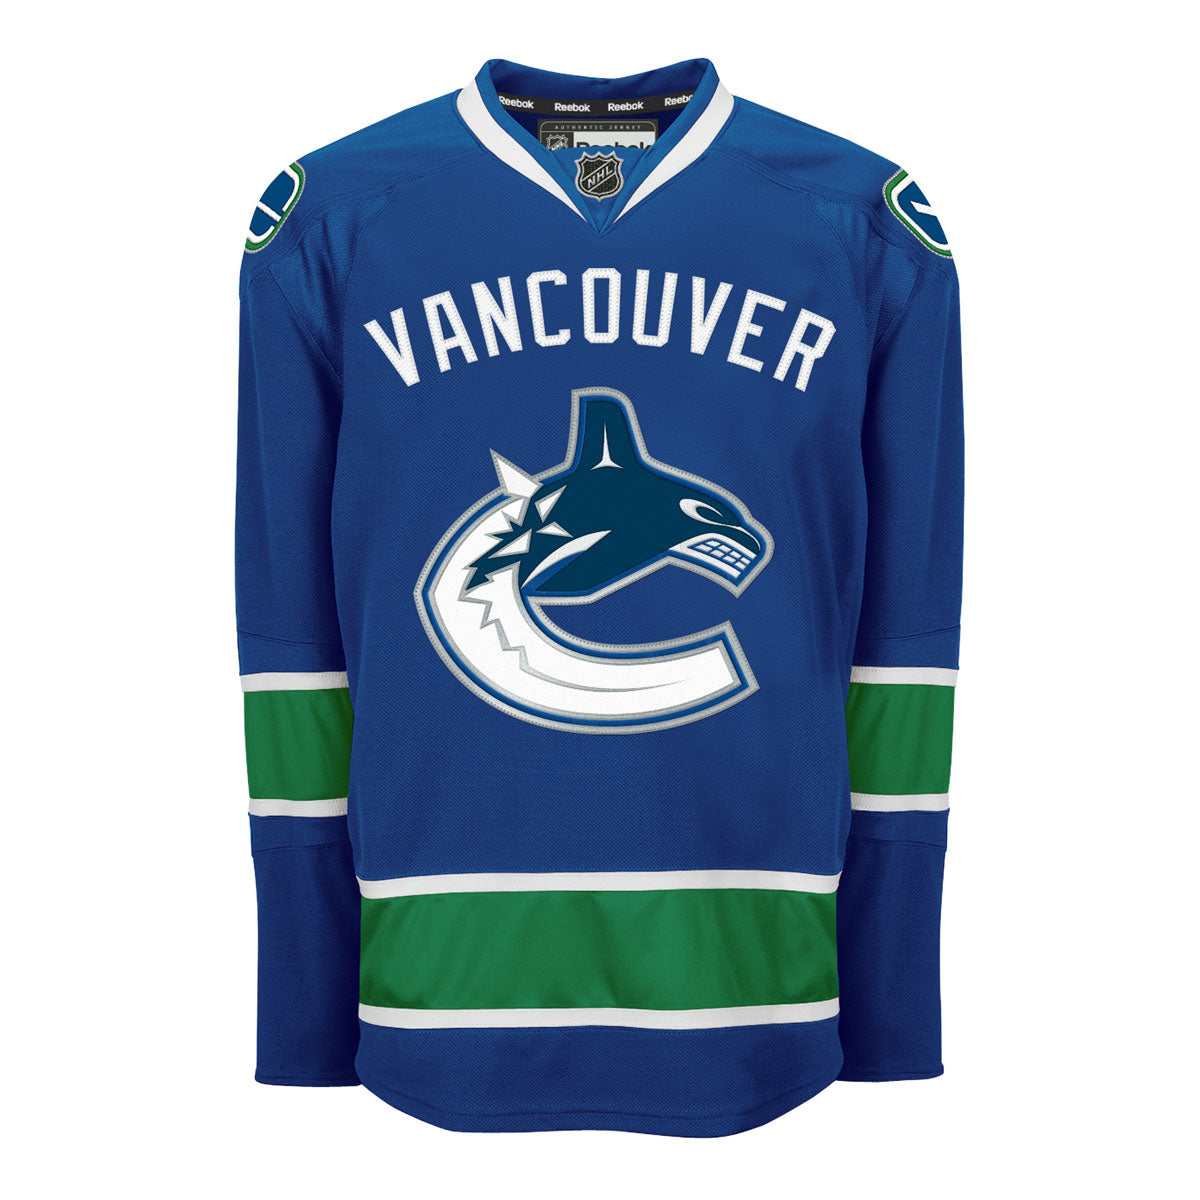 Vancouver Canucks 2006-07 - The (unofficial) NHL Uniform Database